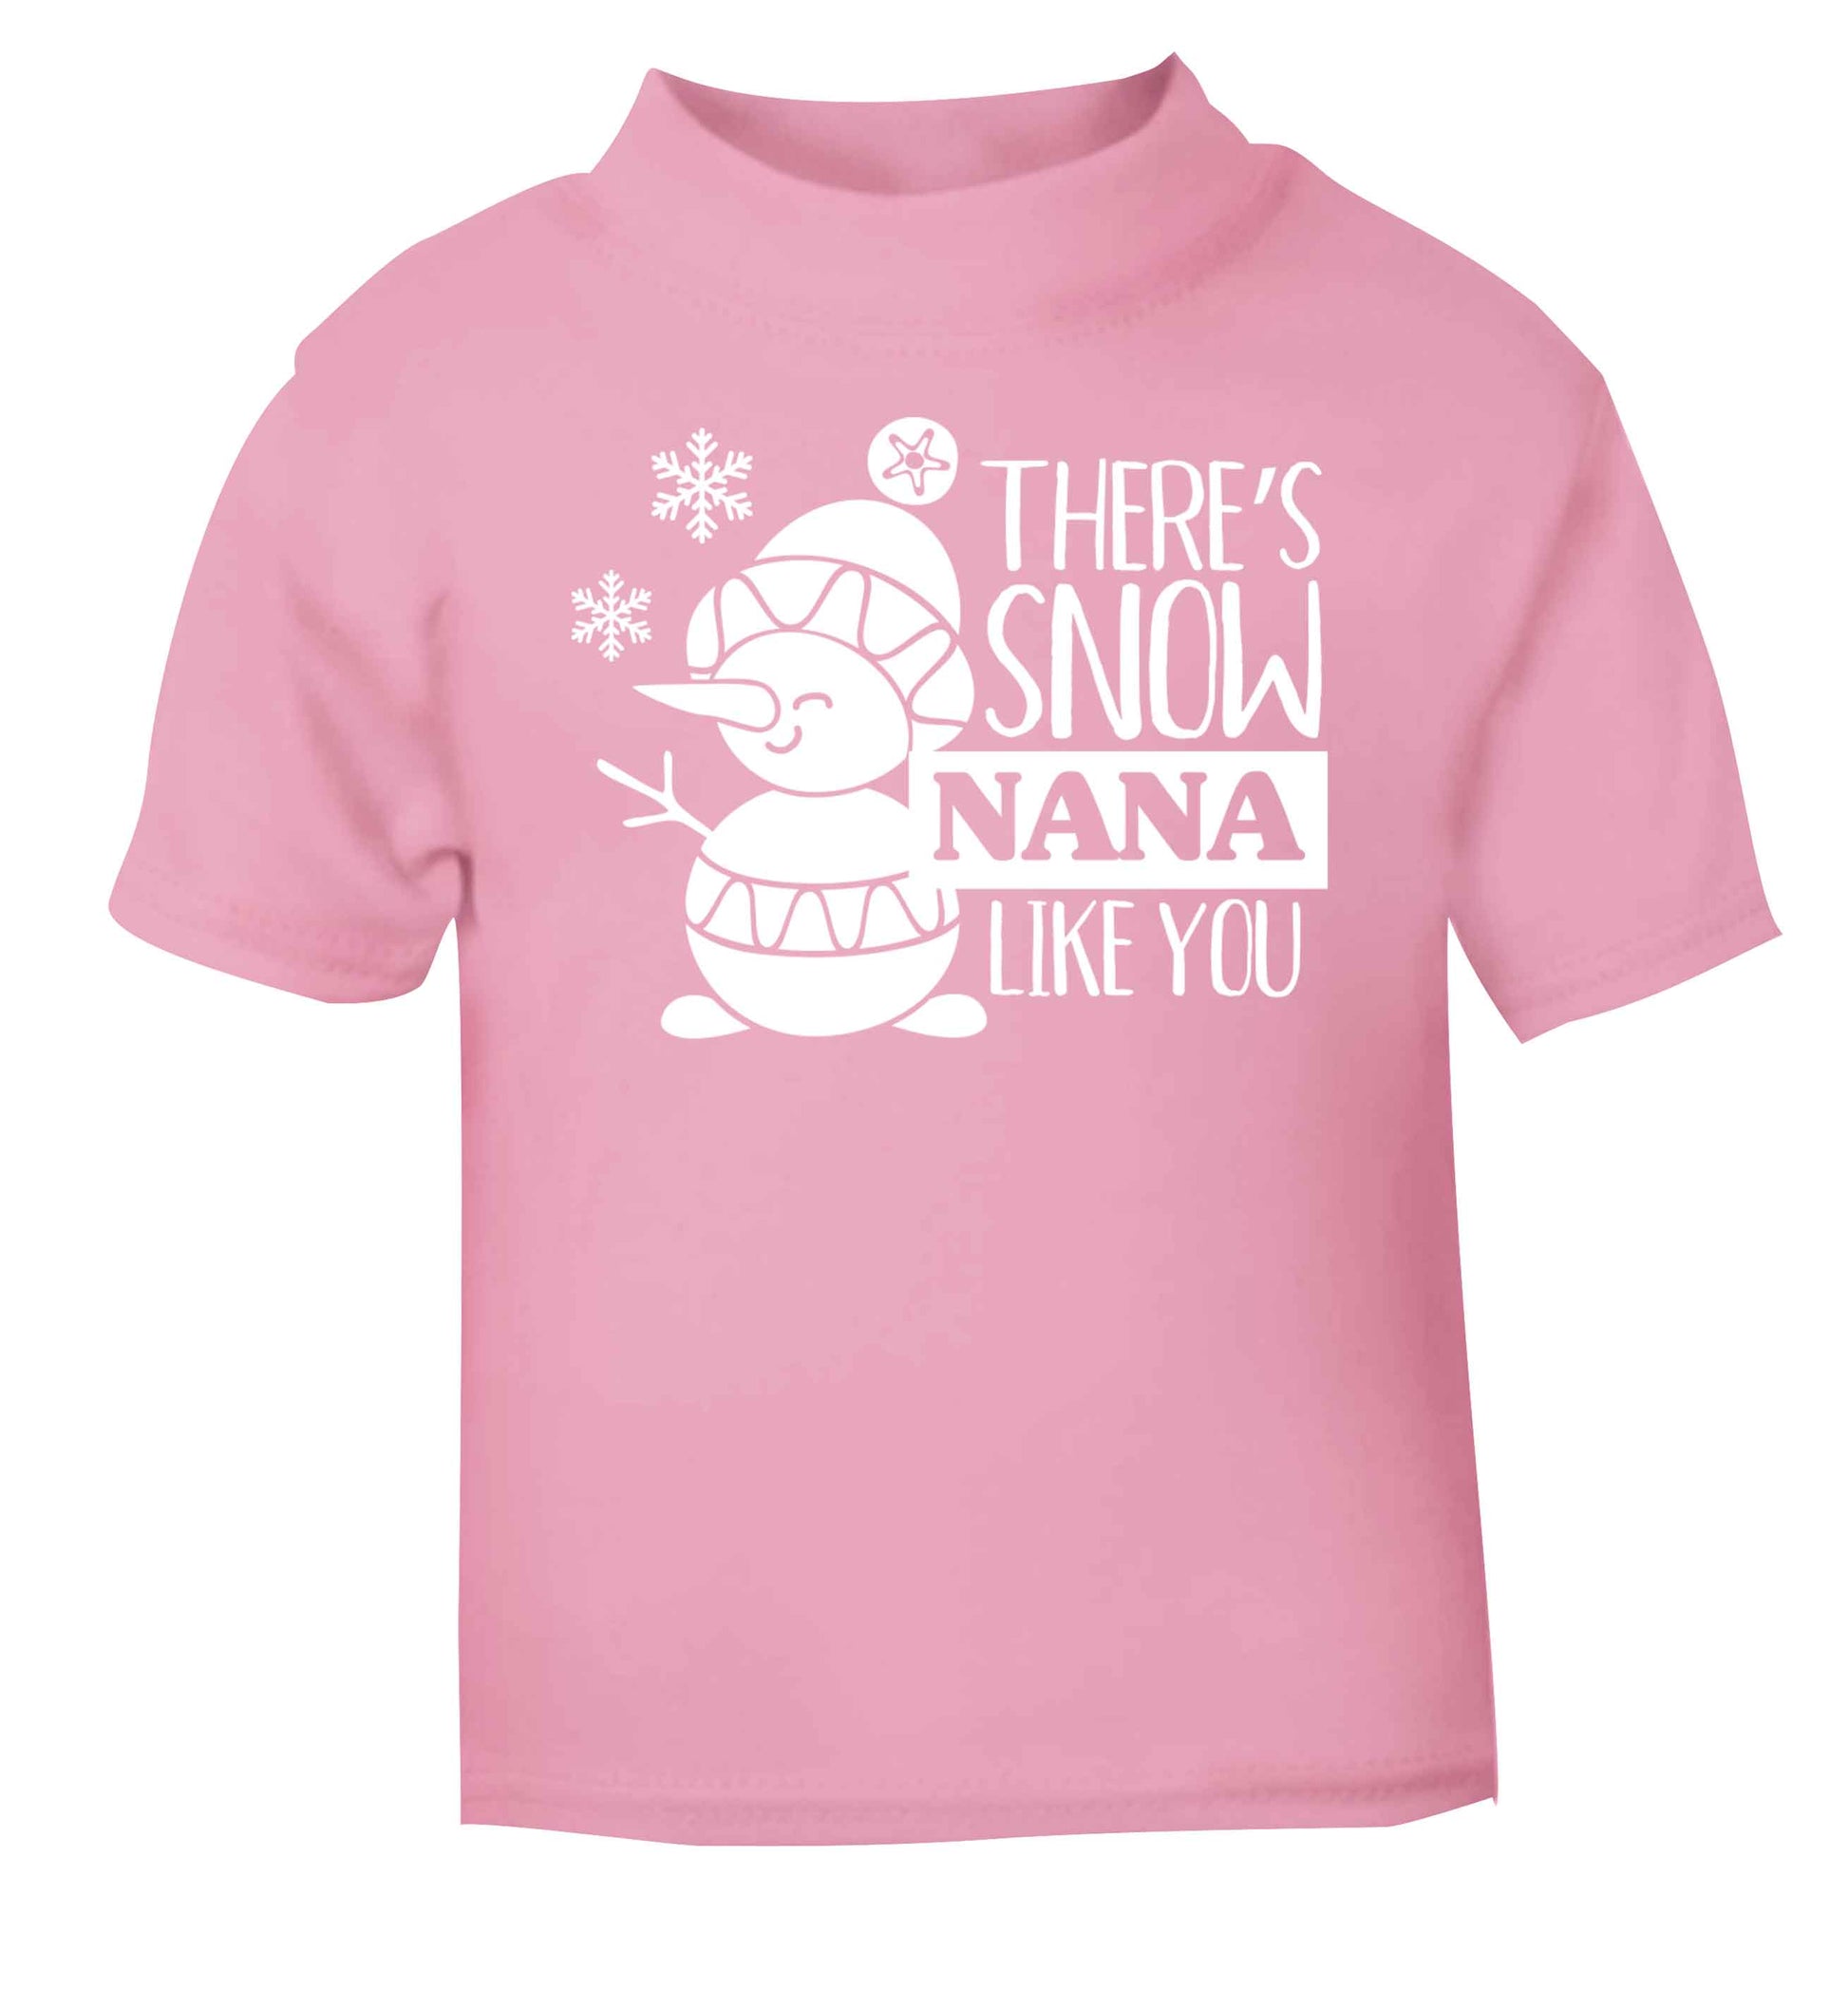 There's snow nana like you light pink baby toddler Tshirt 2 Years